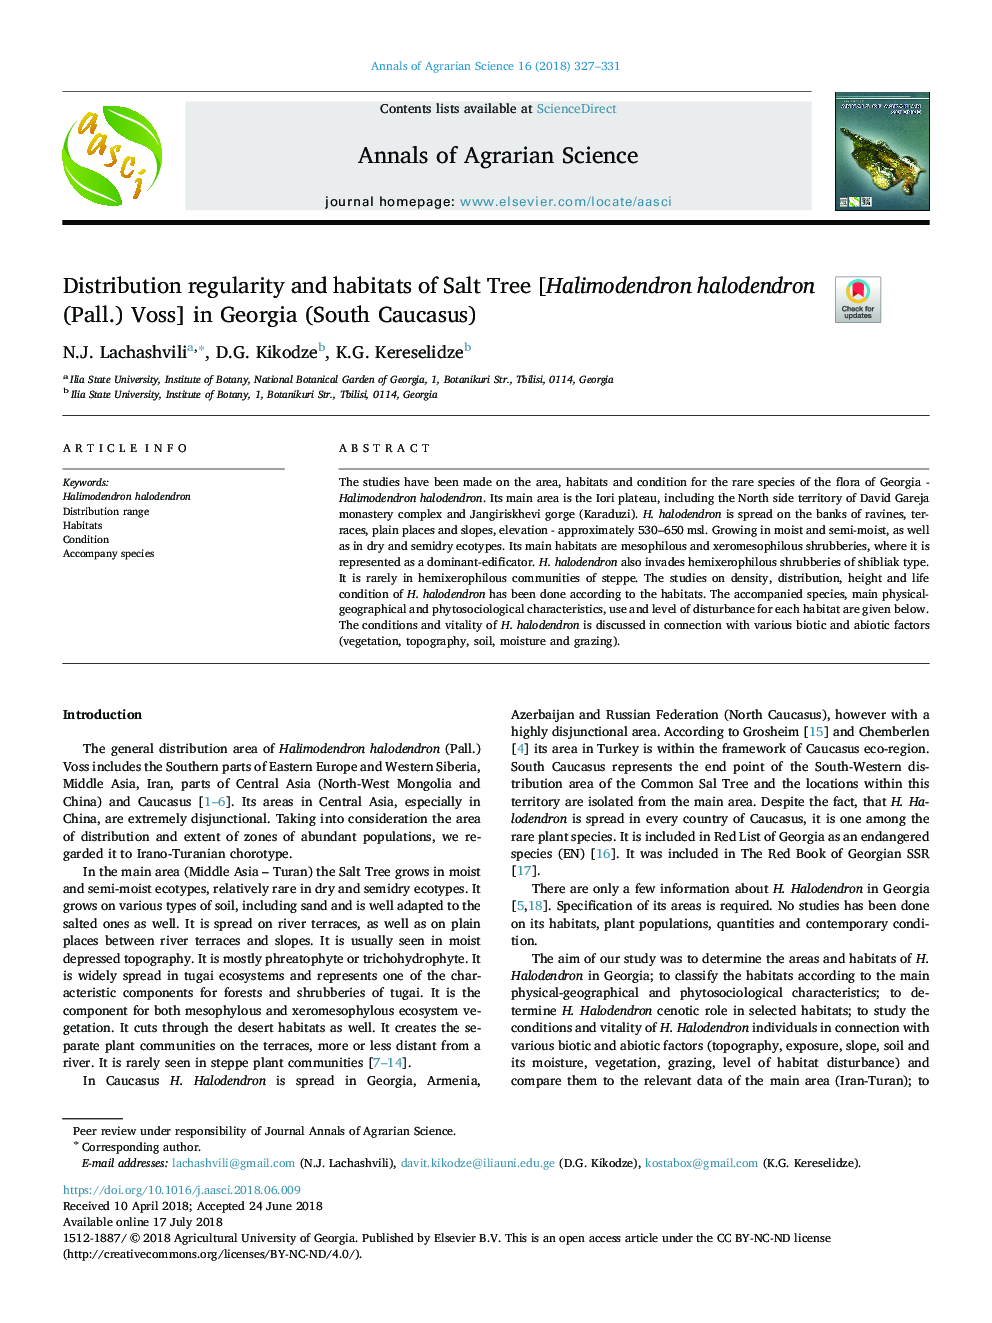 Distribution regularity and habitats of Salt Tree [Halimodendron halodendron (Pall.) Voss] in Georgia (South Caucasus)